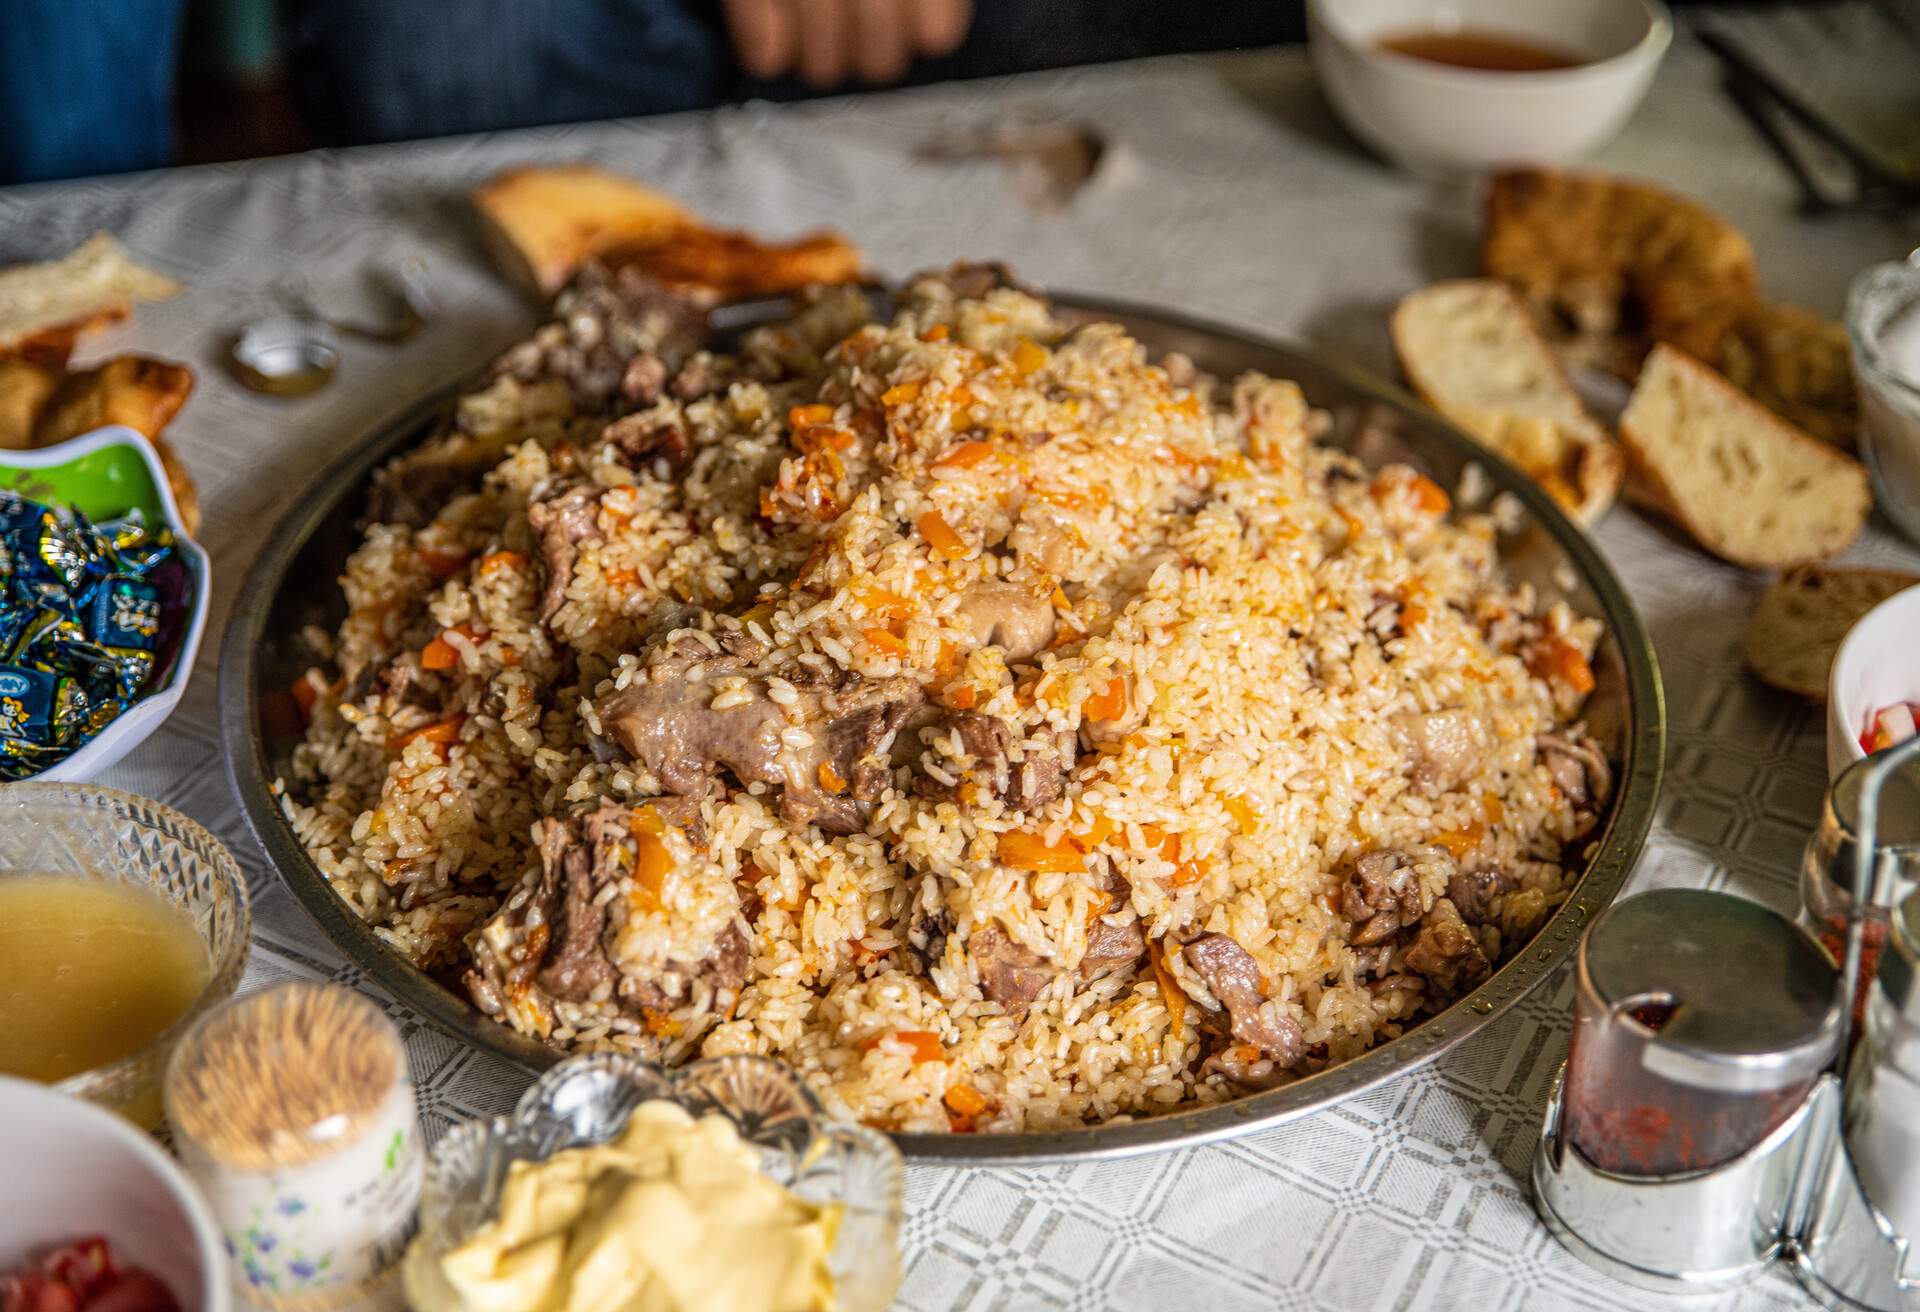 Traditional Central Asian delicious dish Plov prepared by local people, Chon-kemin Valley, Chui, Kyrgyzstan - June 17, 2021